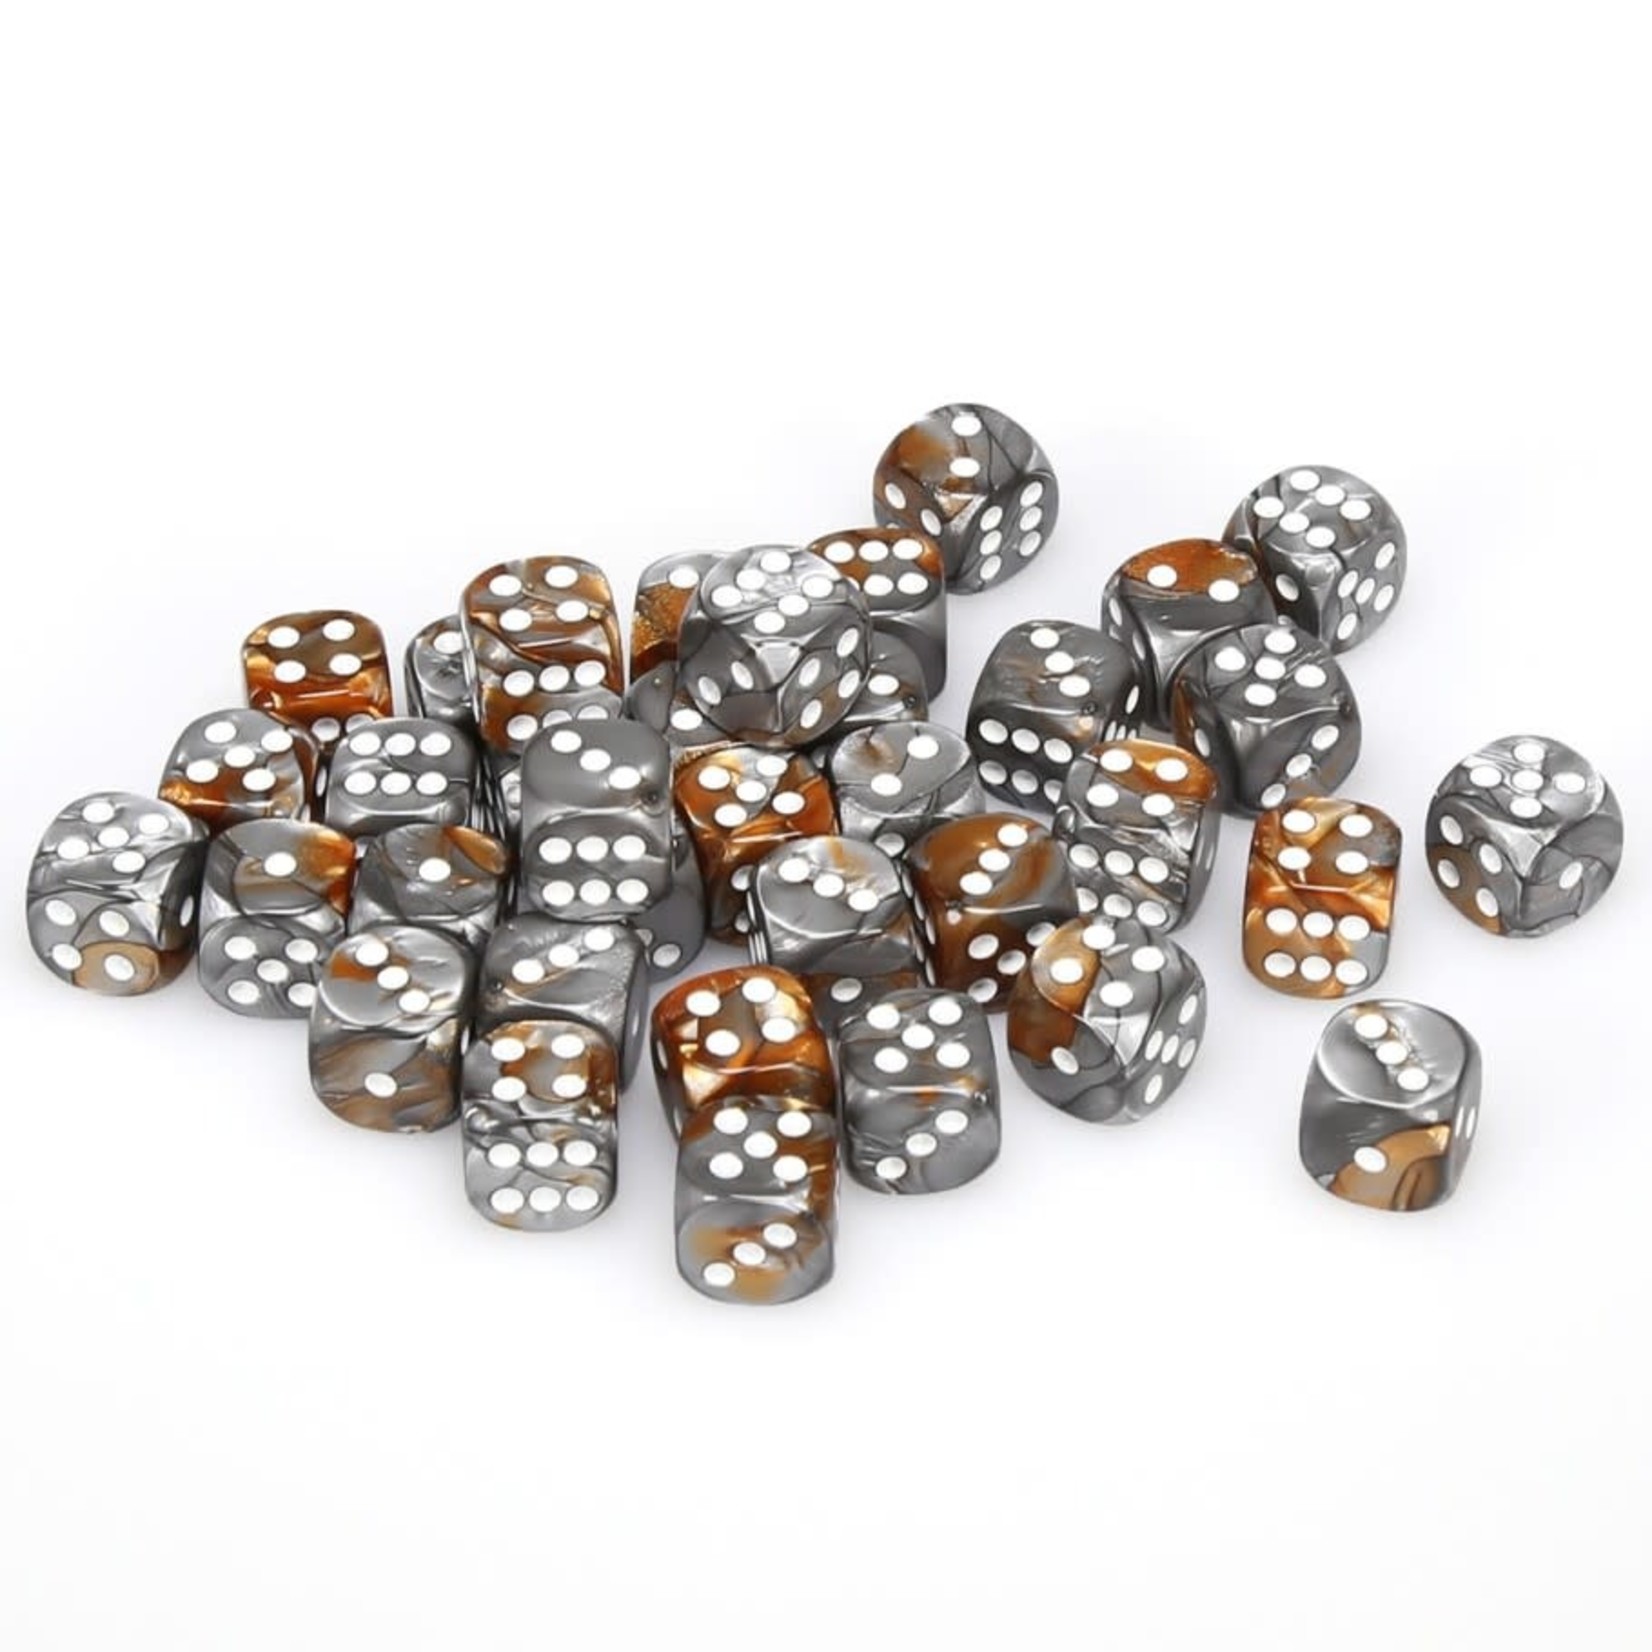 Chessex Chessex Gemini Copper / Steel with White 12 mm d6 36 die set